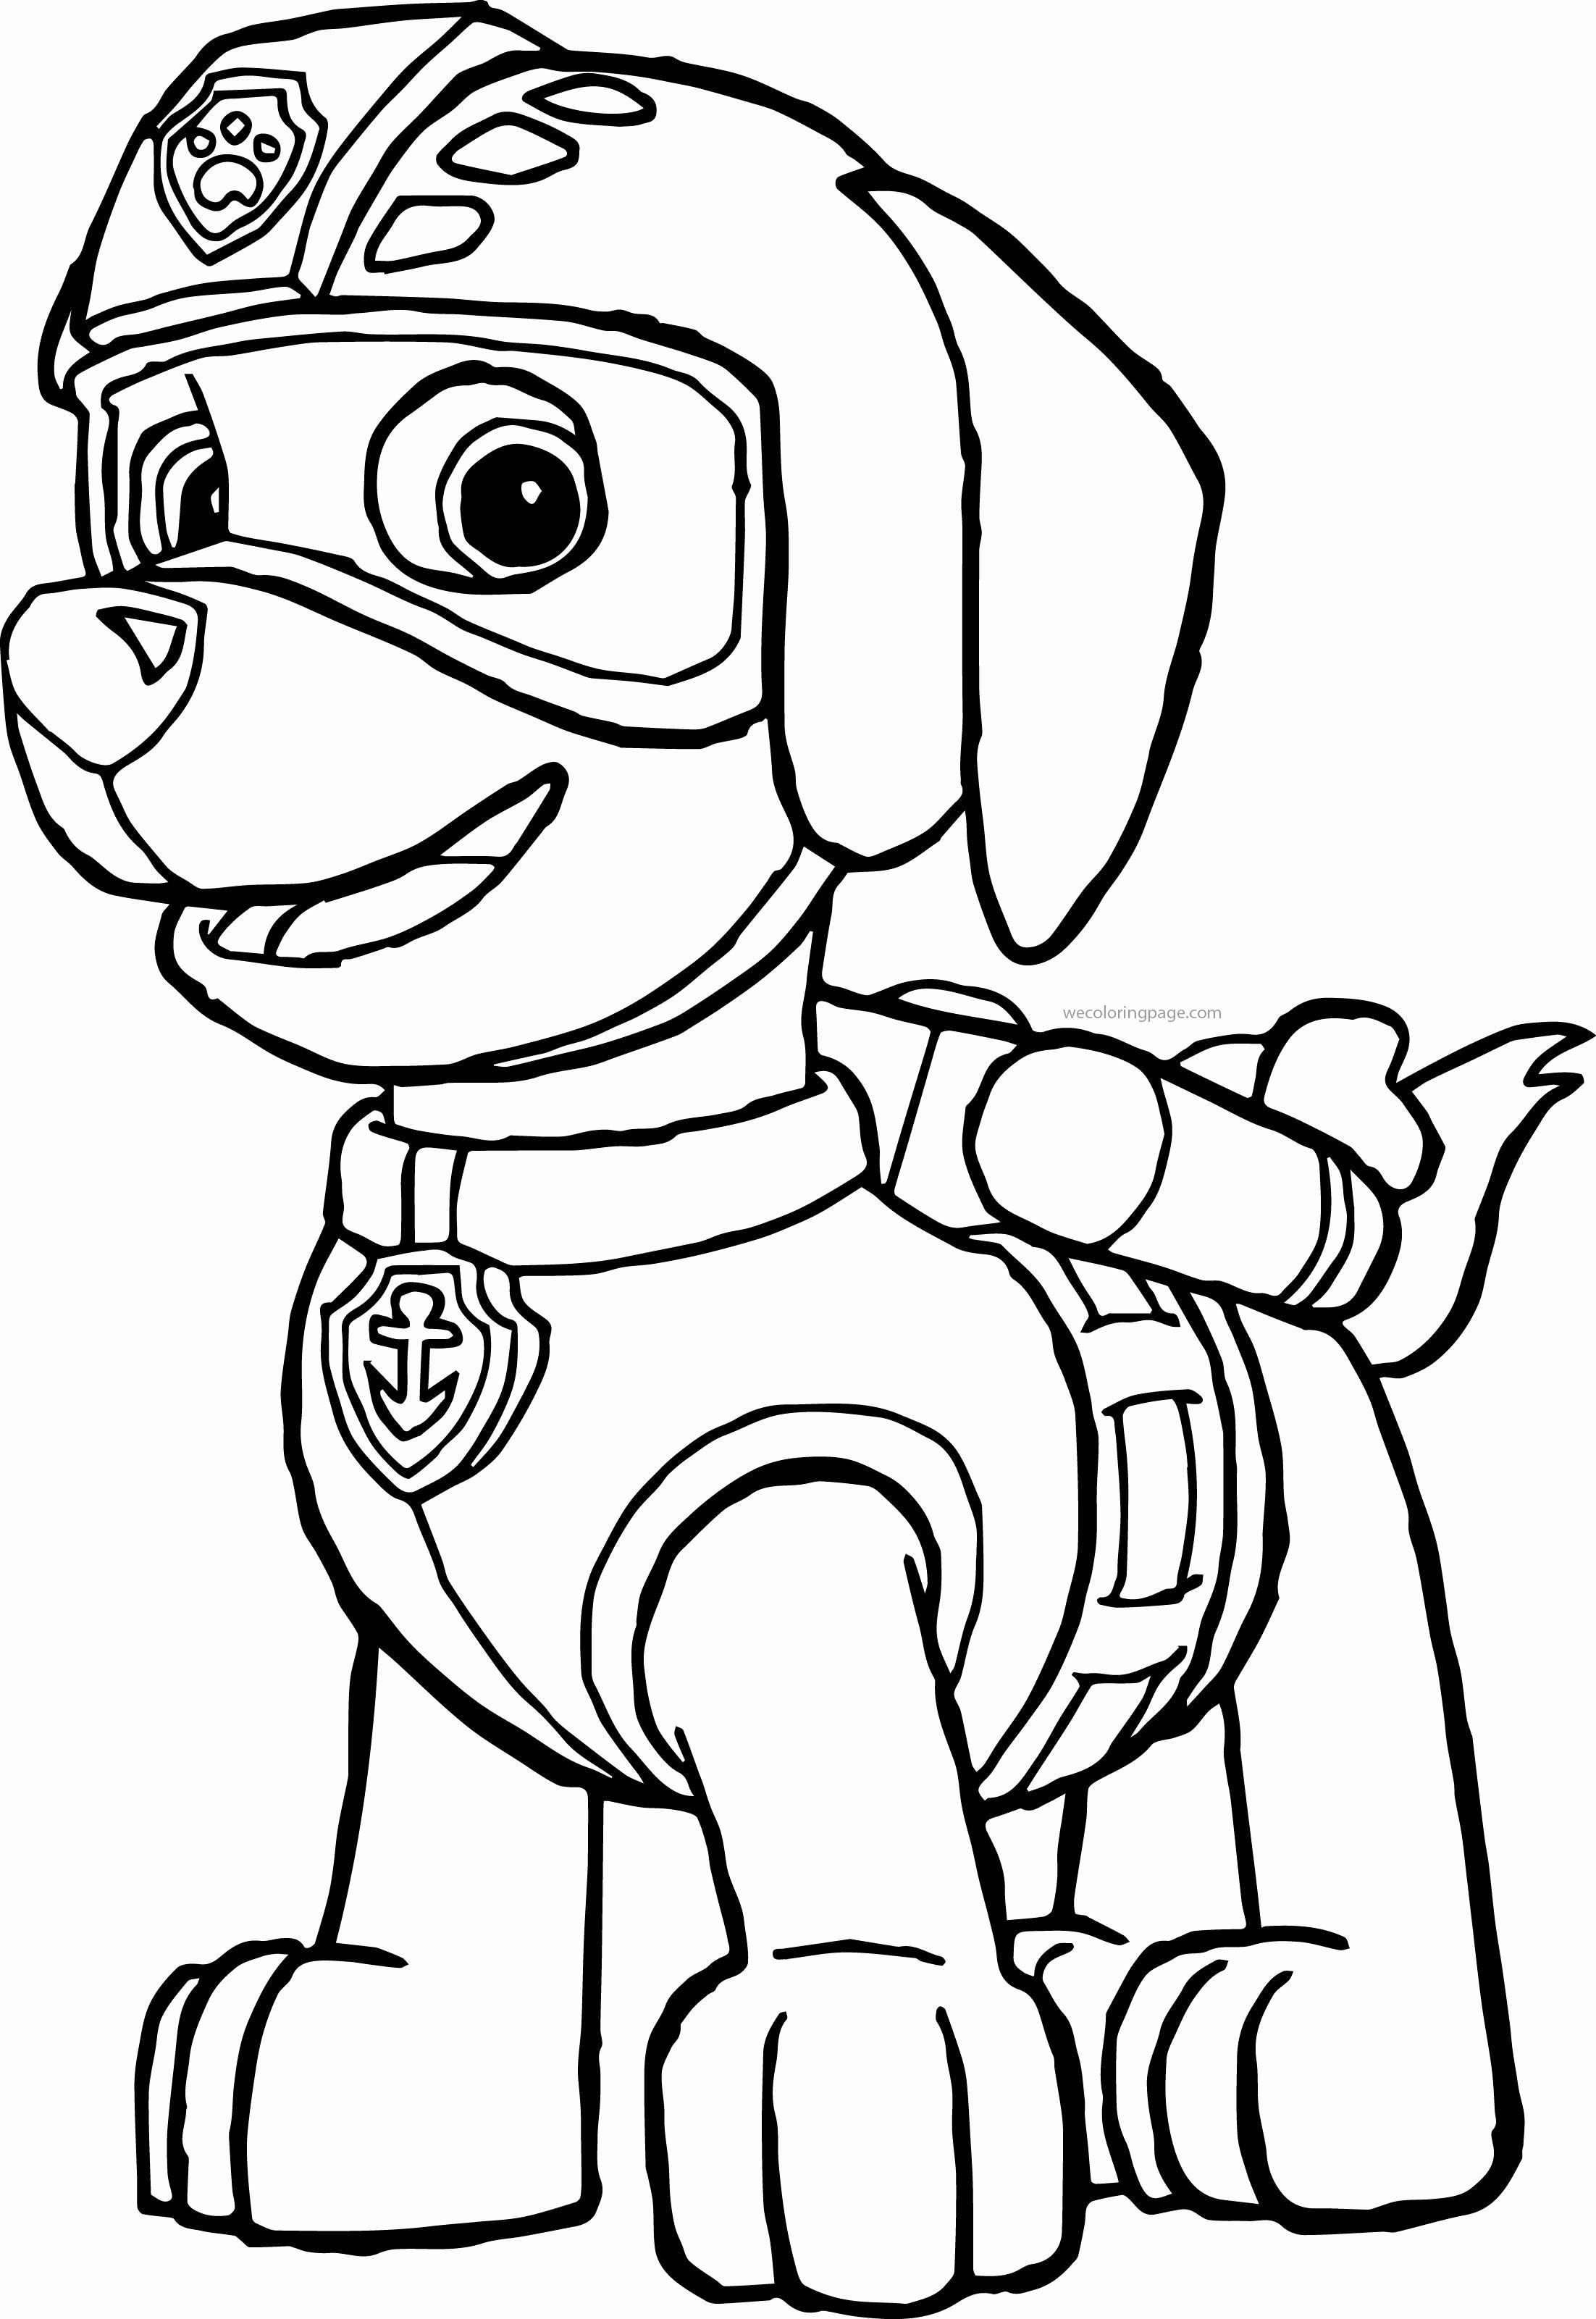 24 Rocky Paw Patrol Coloring Page In 2020 Paw Patrol Coloring